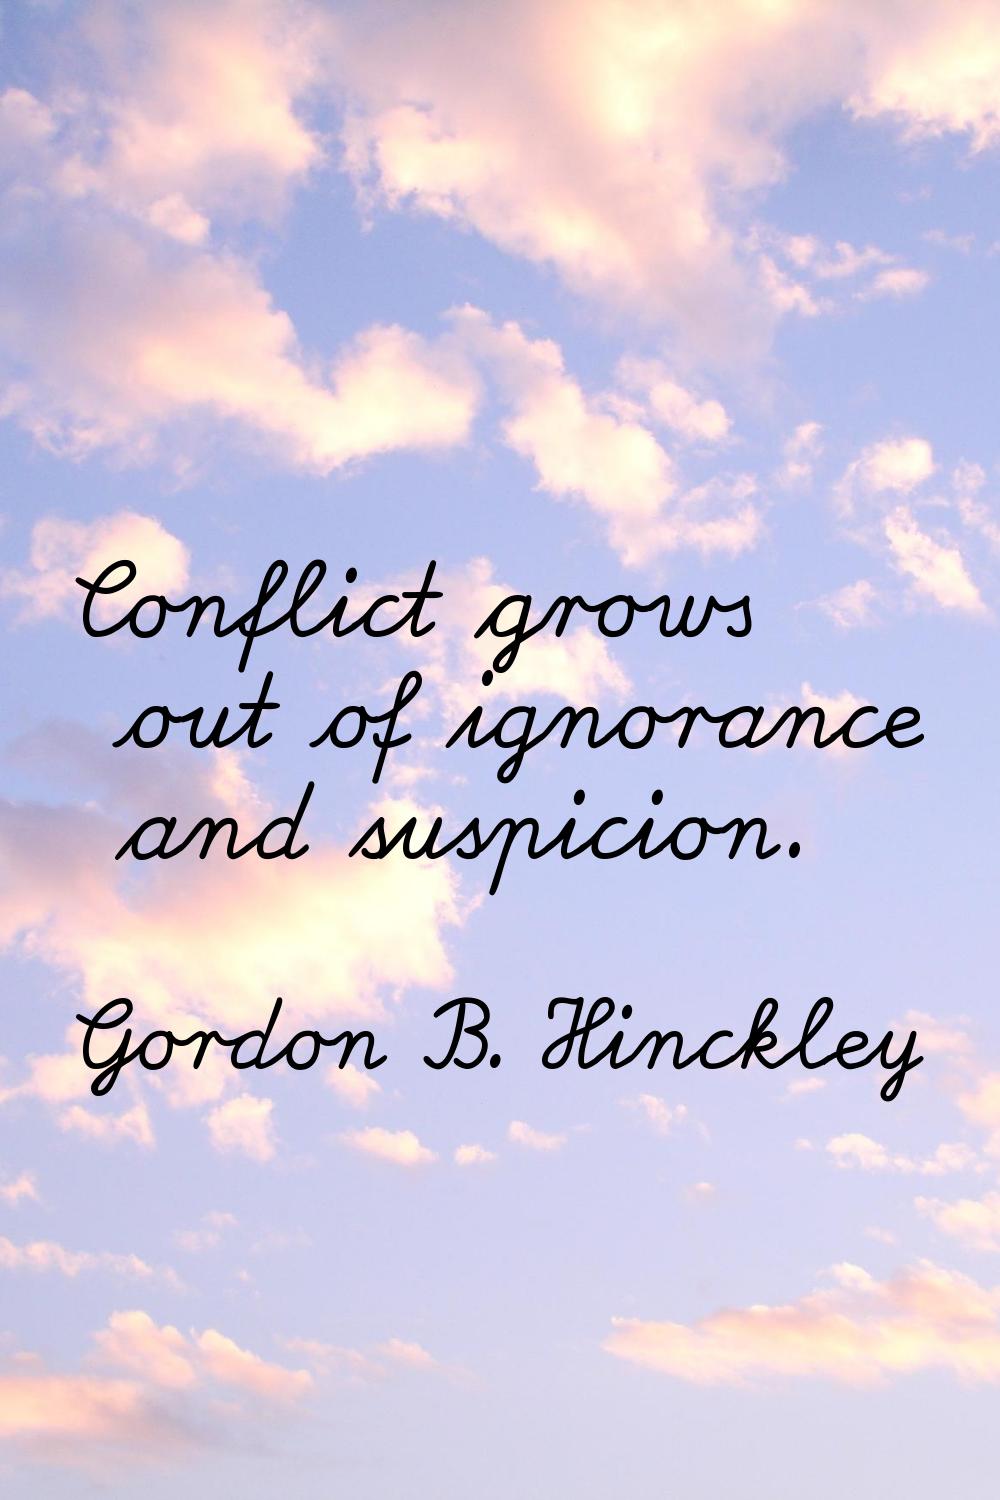 Conflict grows out of ignorance and suspicion.